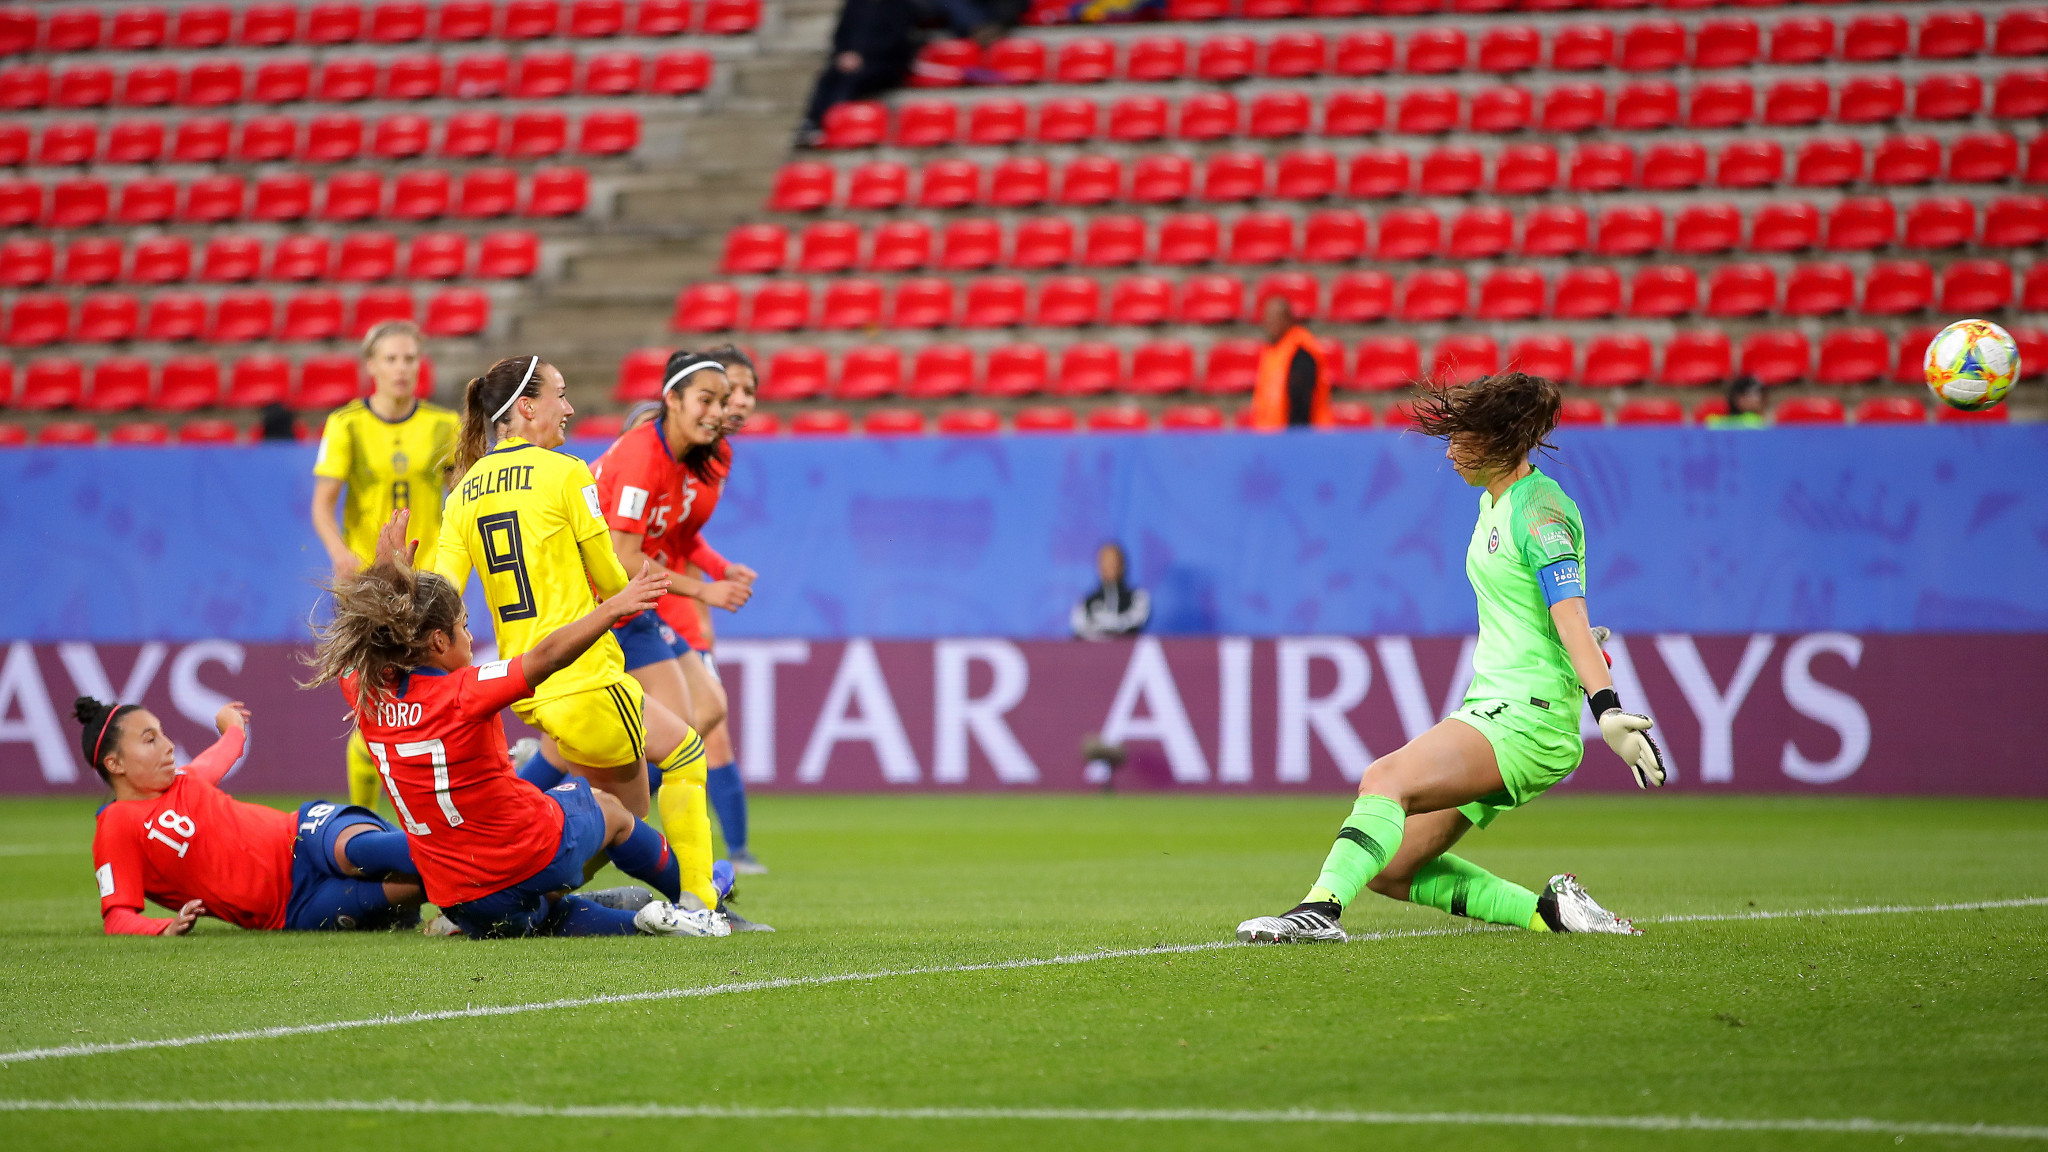 Sweden came back from the 40 minute break the stronger team, with Kosovare Asllani putting them 1-0 up ©Getty Images